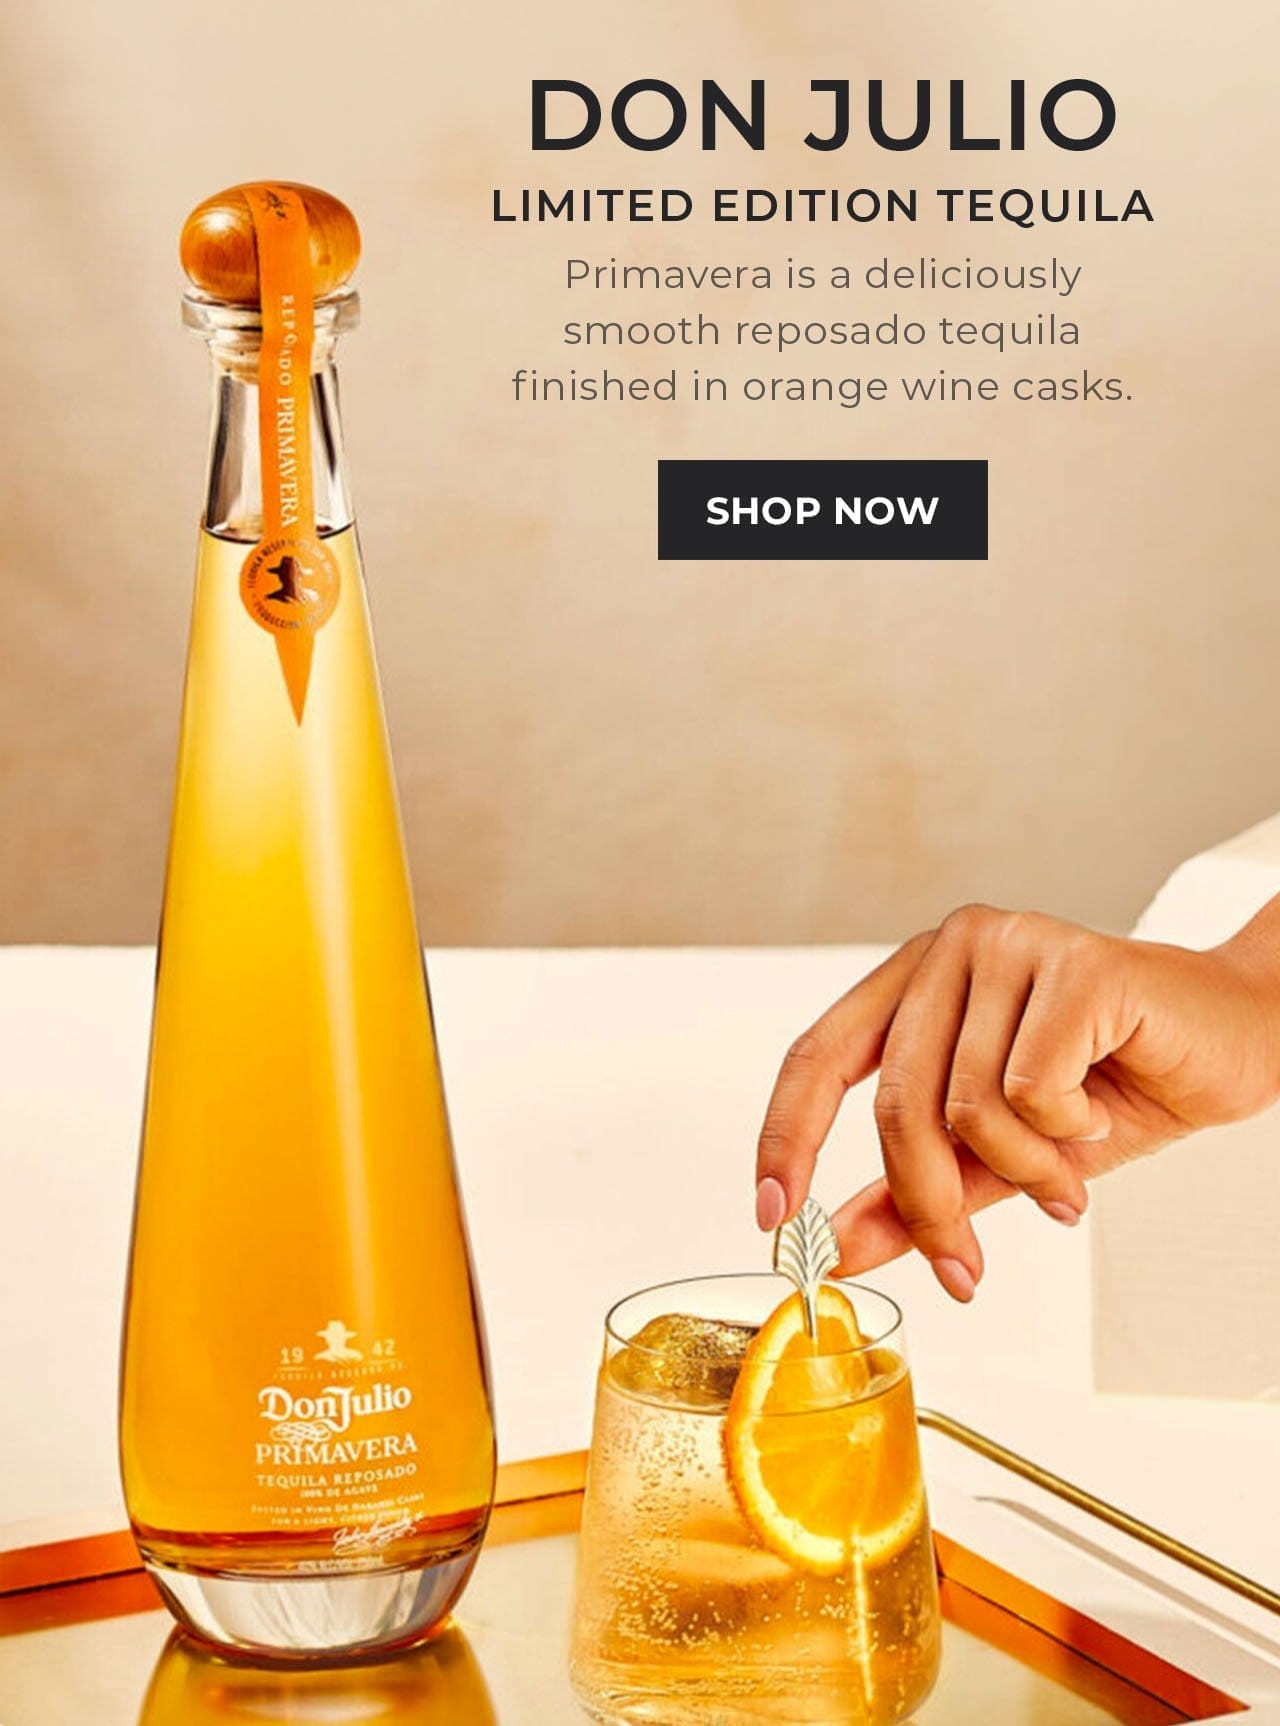 Don Julio Limited Edition Tequila | SHOP NOW